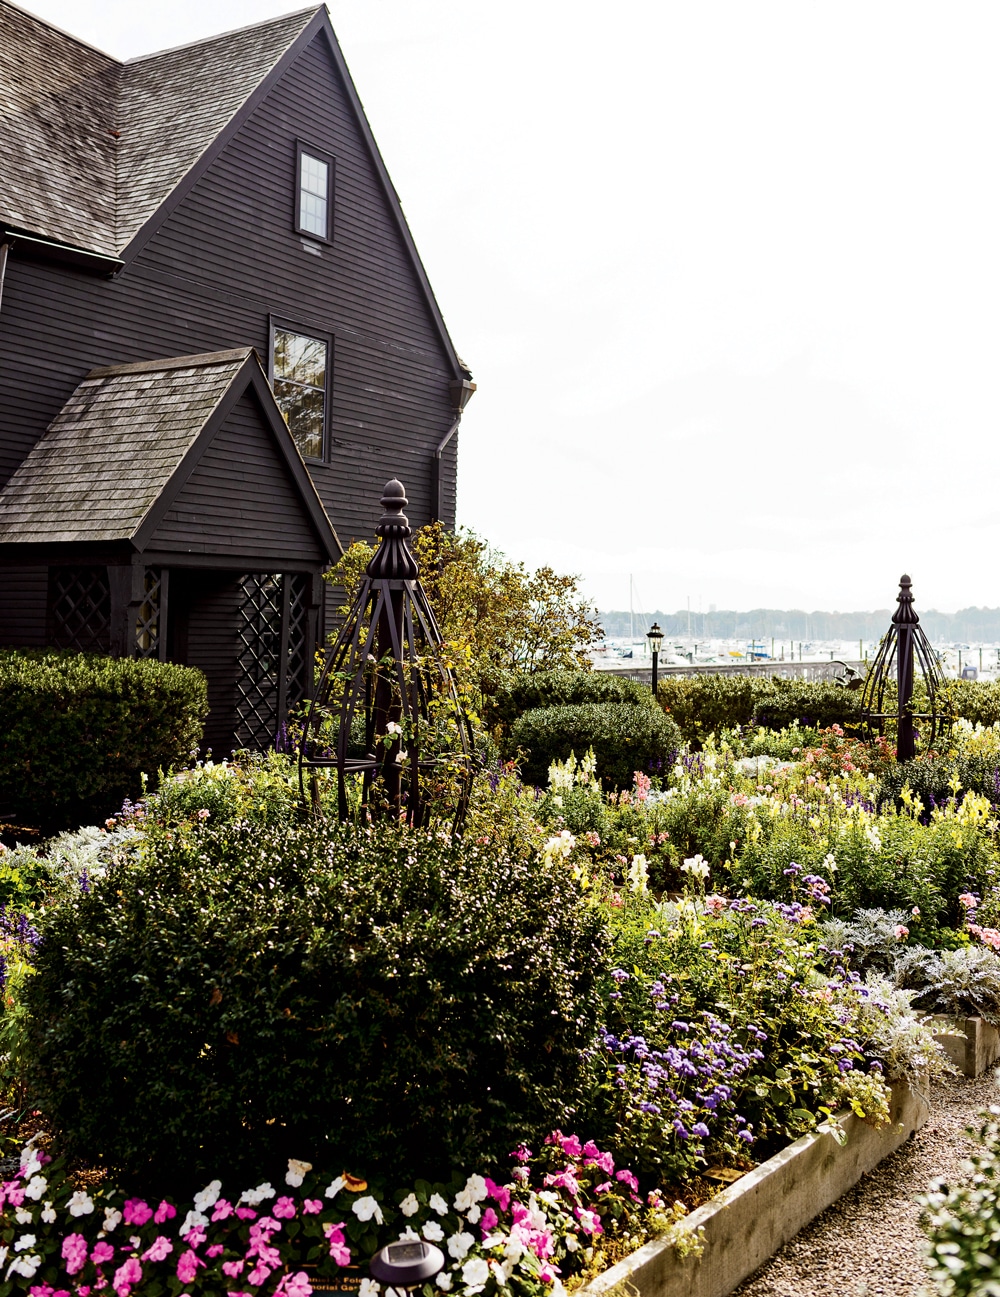 The preserved 17th-century Salem Harbor mansion that inspired Hawthorne’s The House of the Seven Gables.